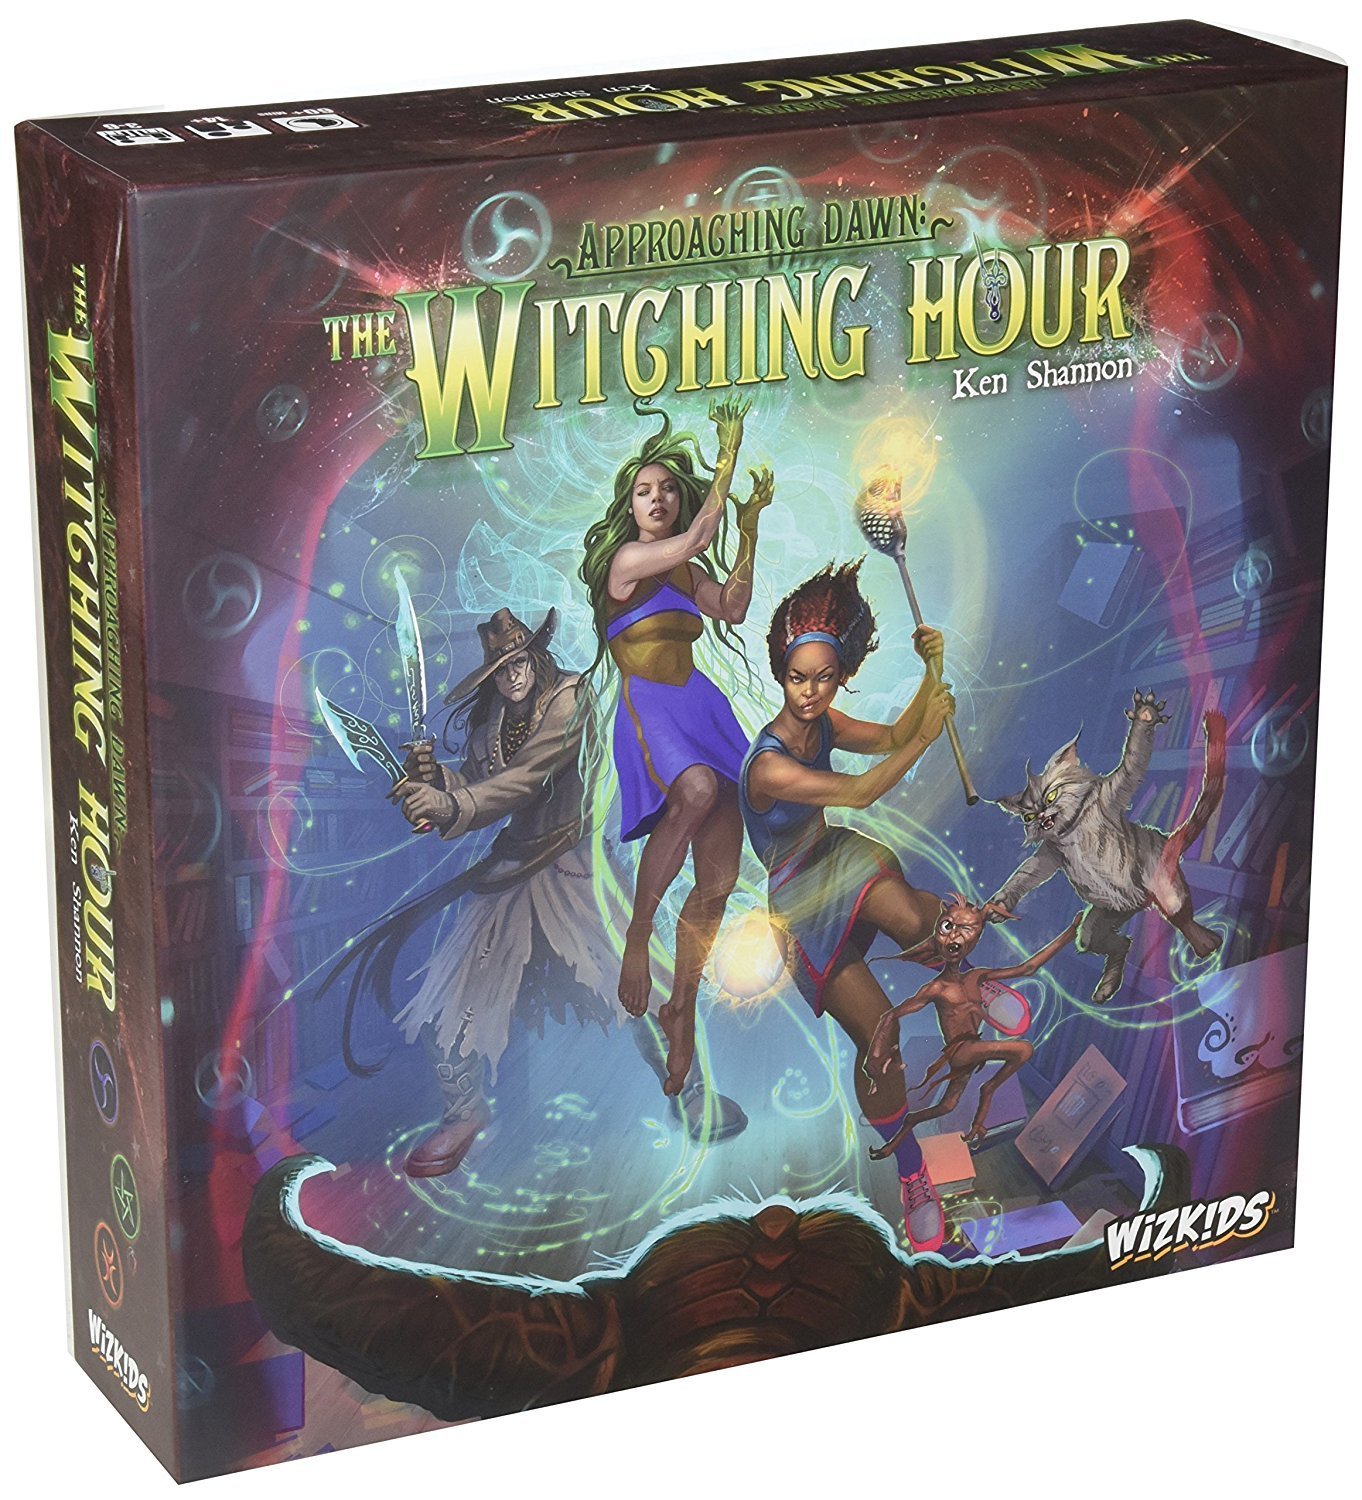 Approaching Dawn: The Witching Hour